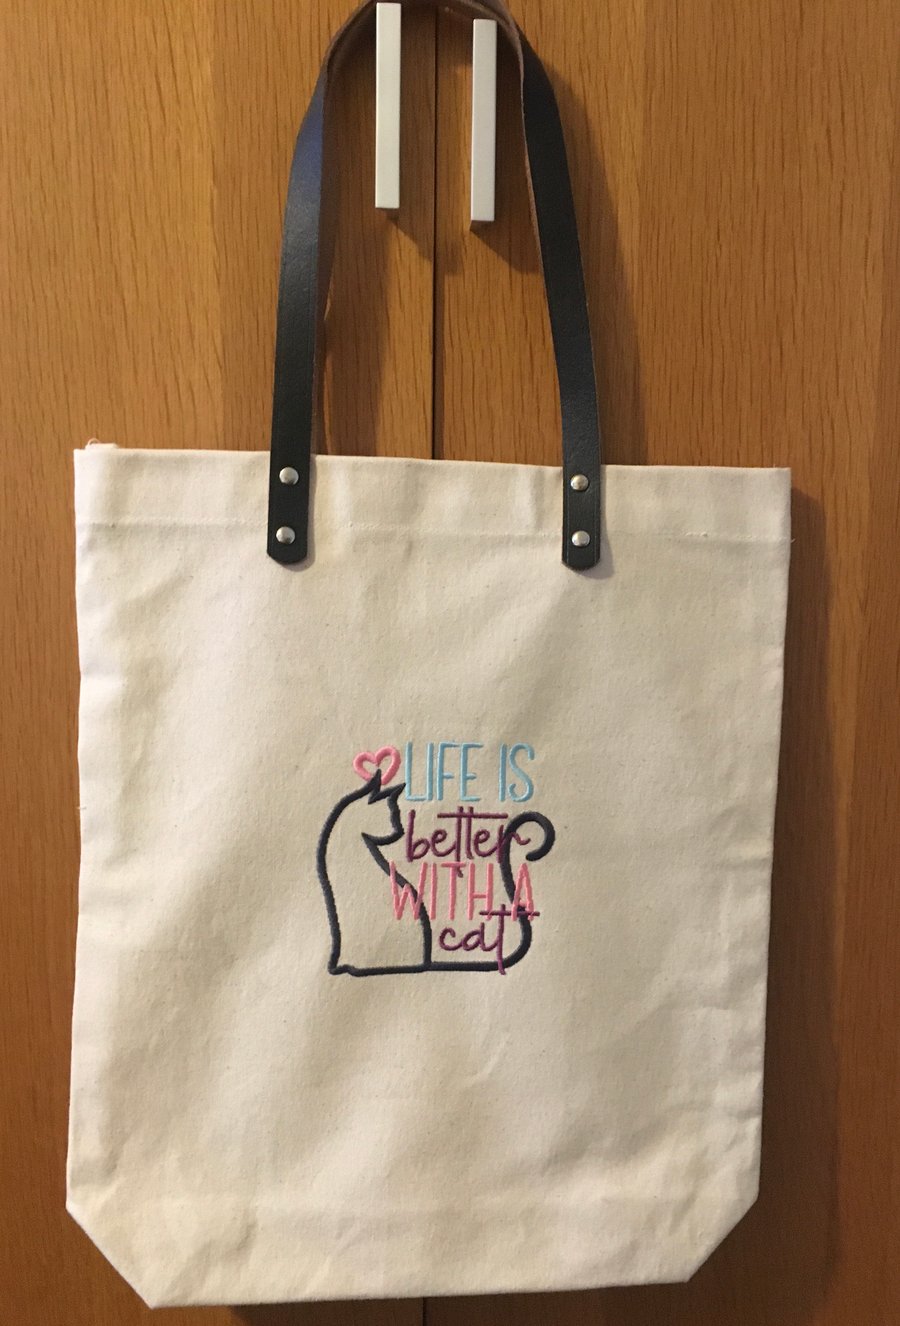 Cats Tote bag embroidered 